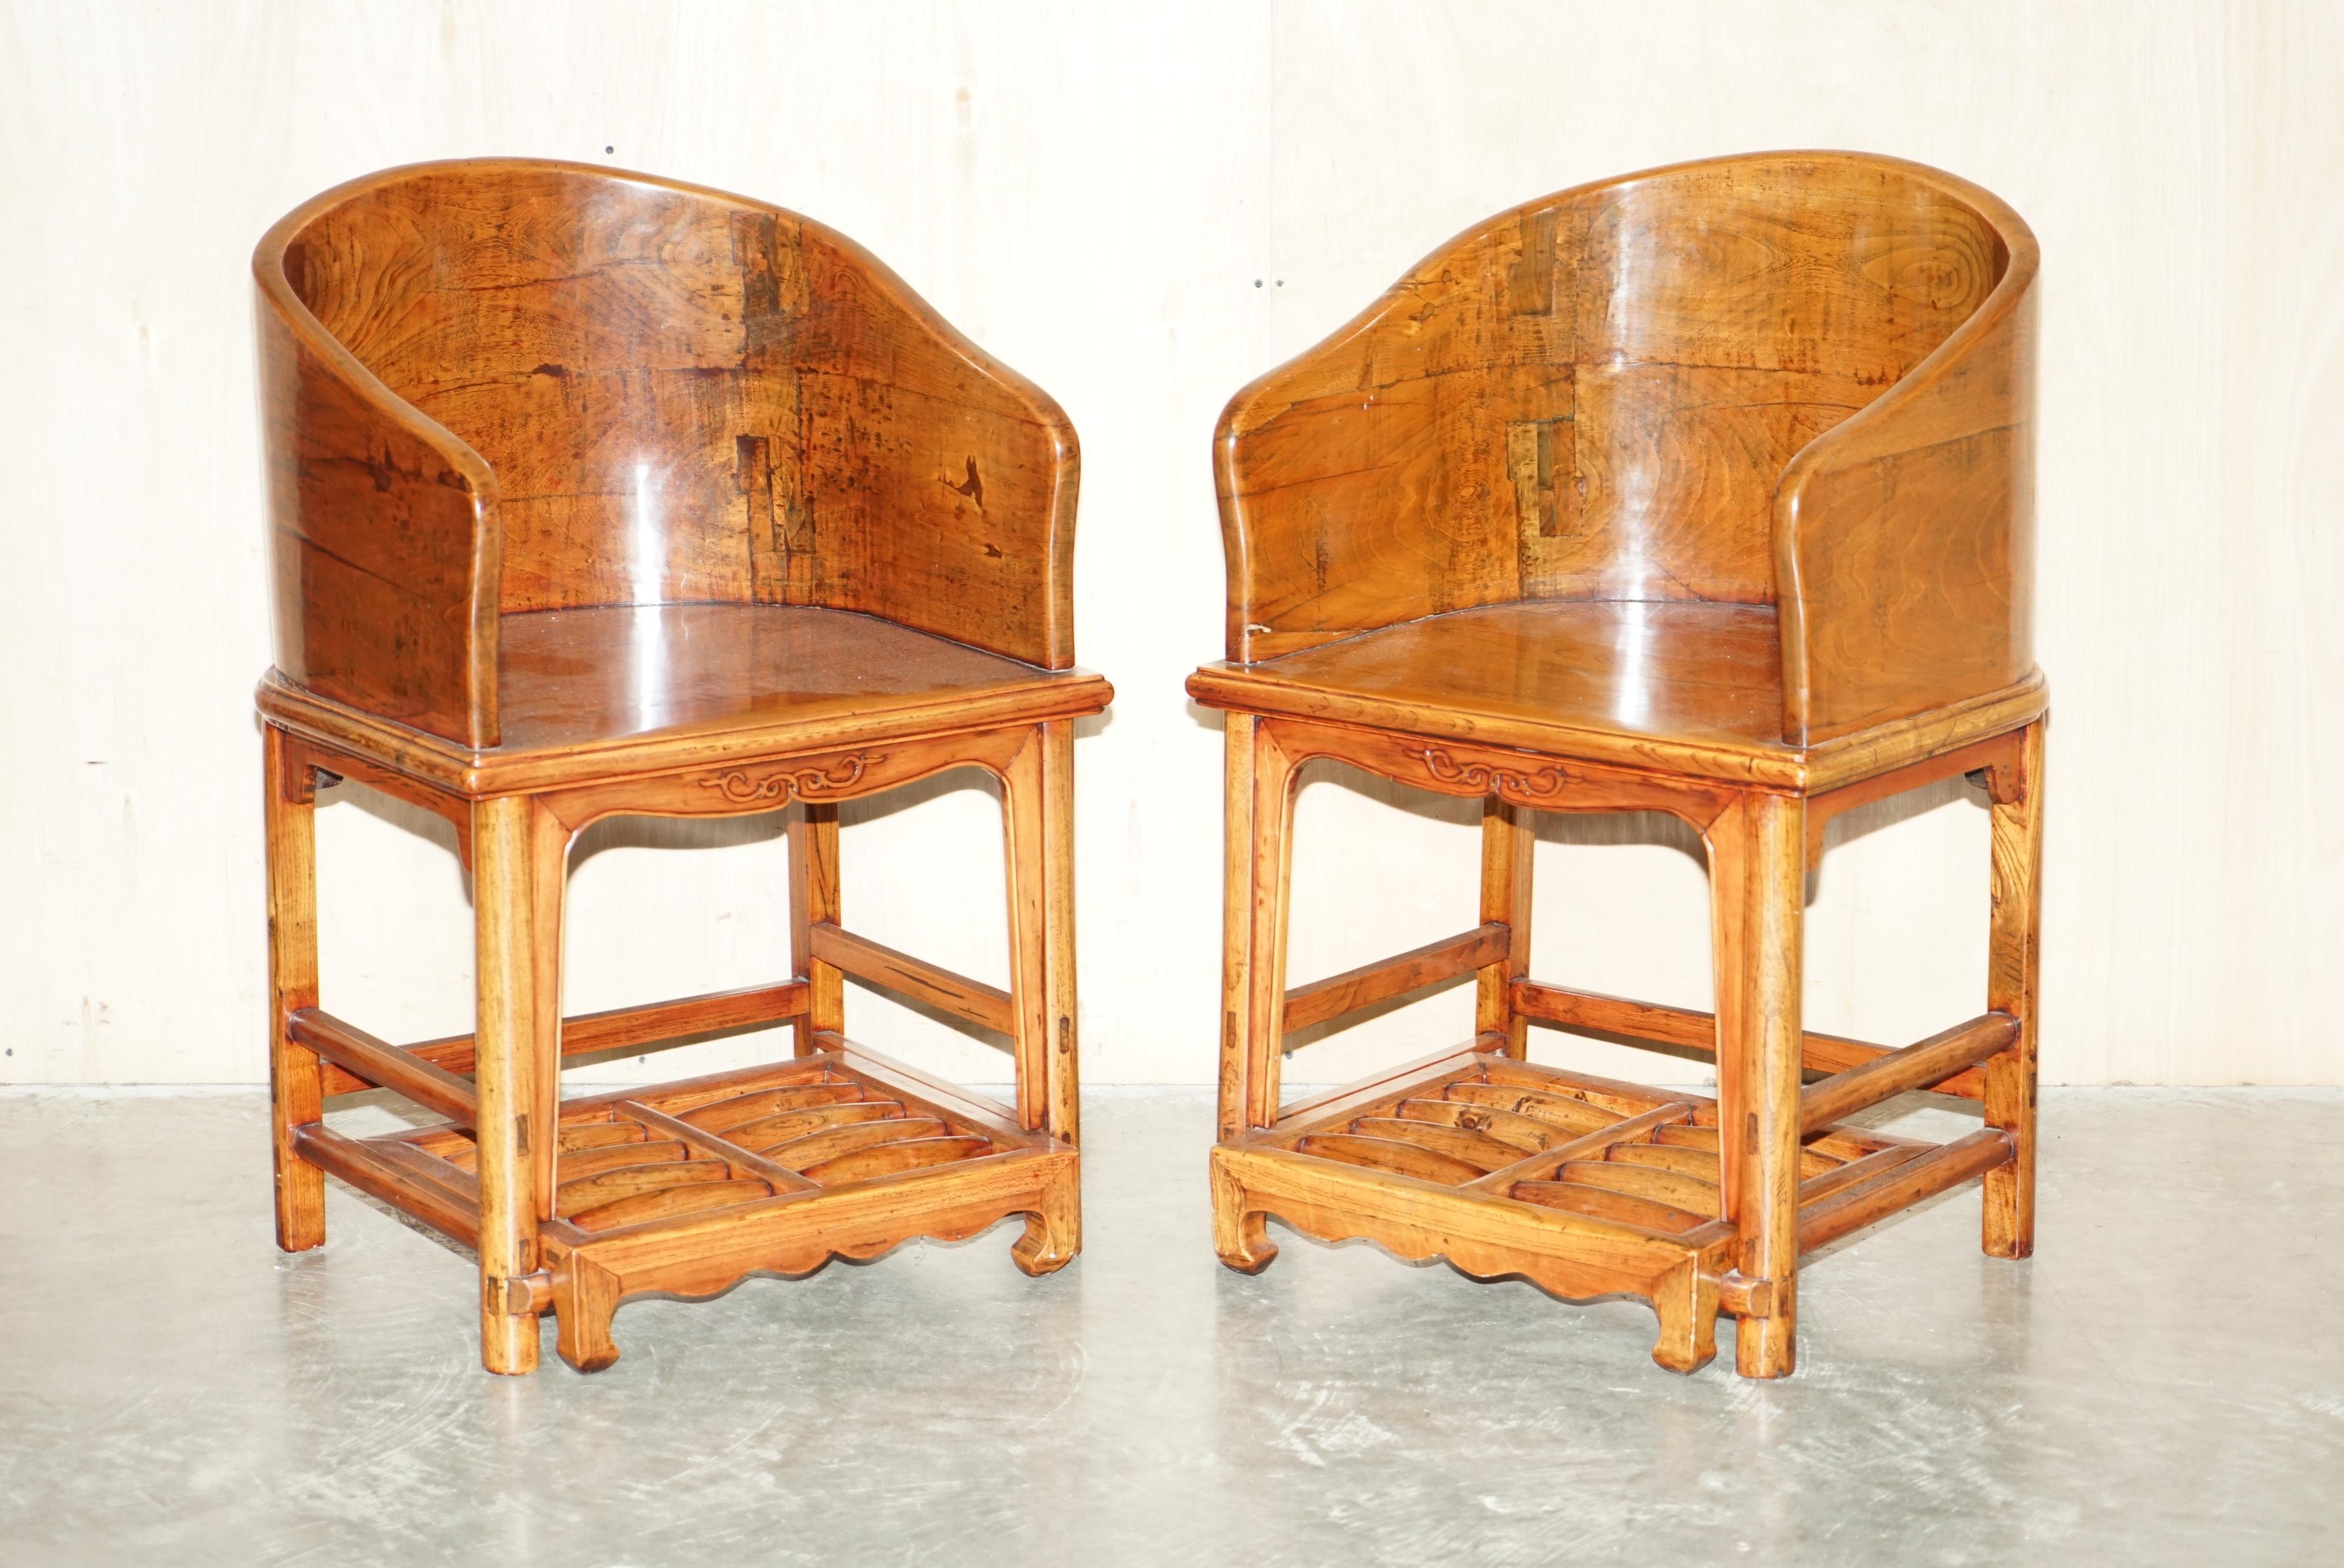 We are delighted to offer for sale this stunning pair of antique Chinese Elm Horseshoe chairs with slide out roller footrests.

A very good looking and decorative pair of antique Chinese Elm armchairs. They each have a slide out footrest which has